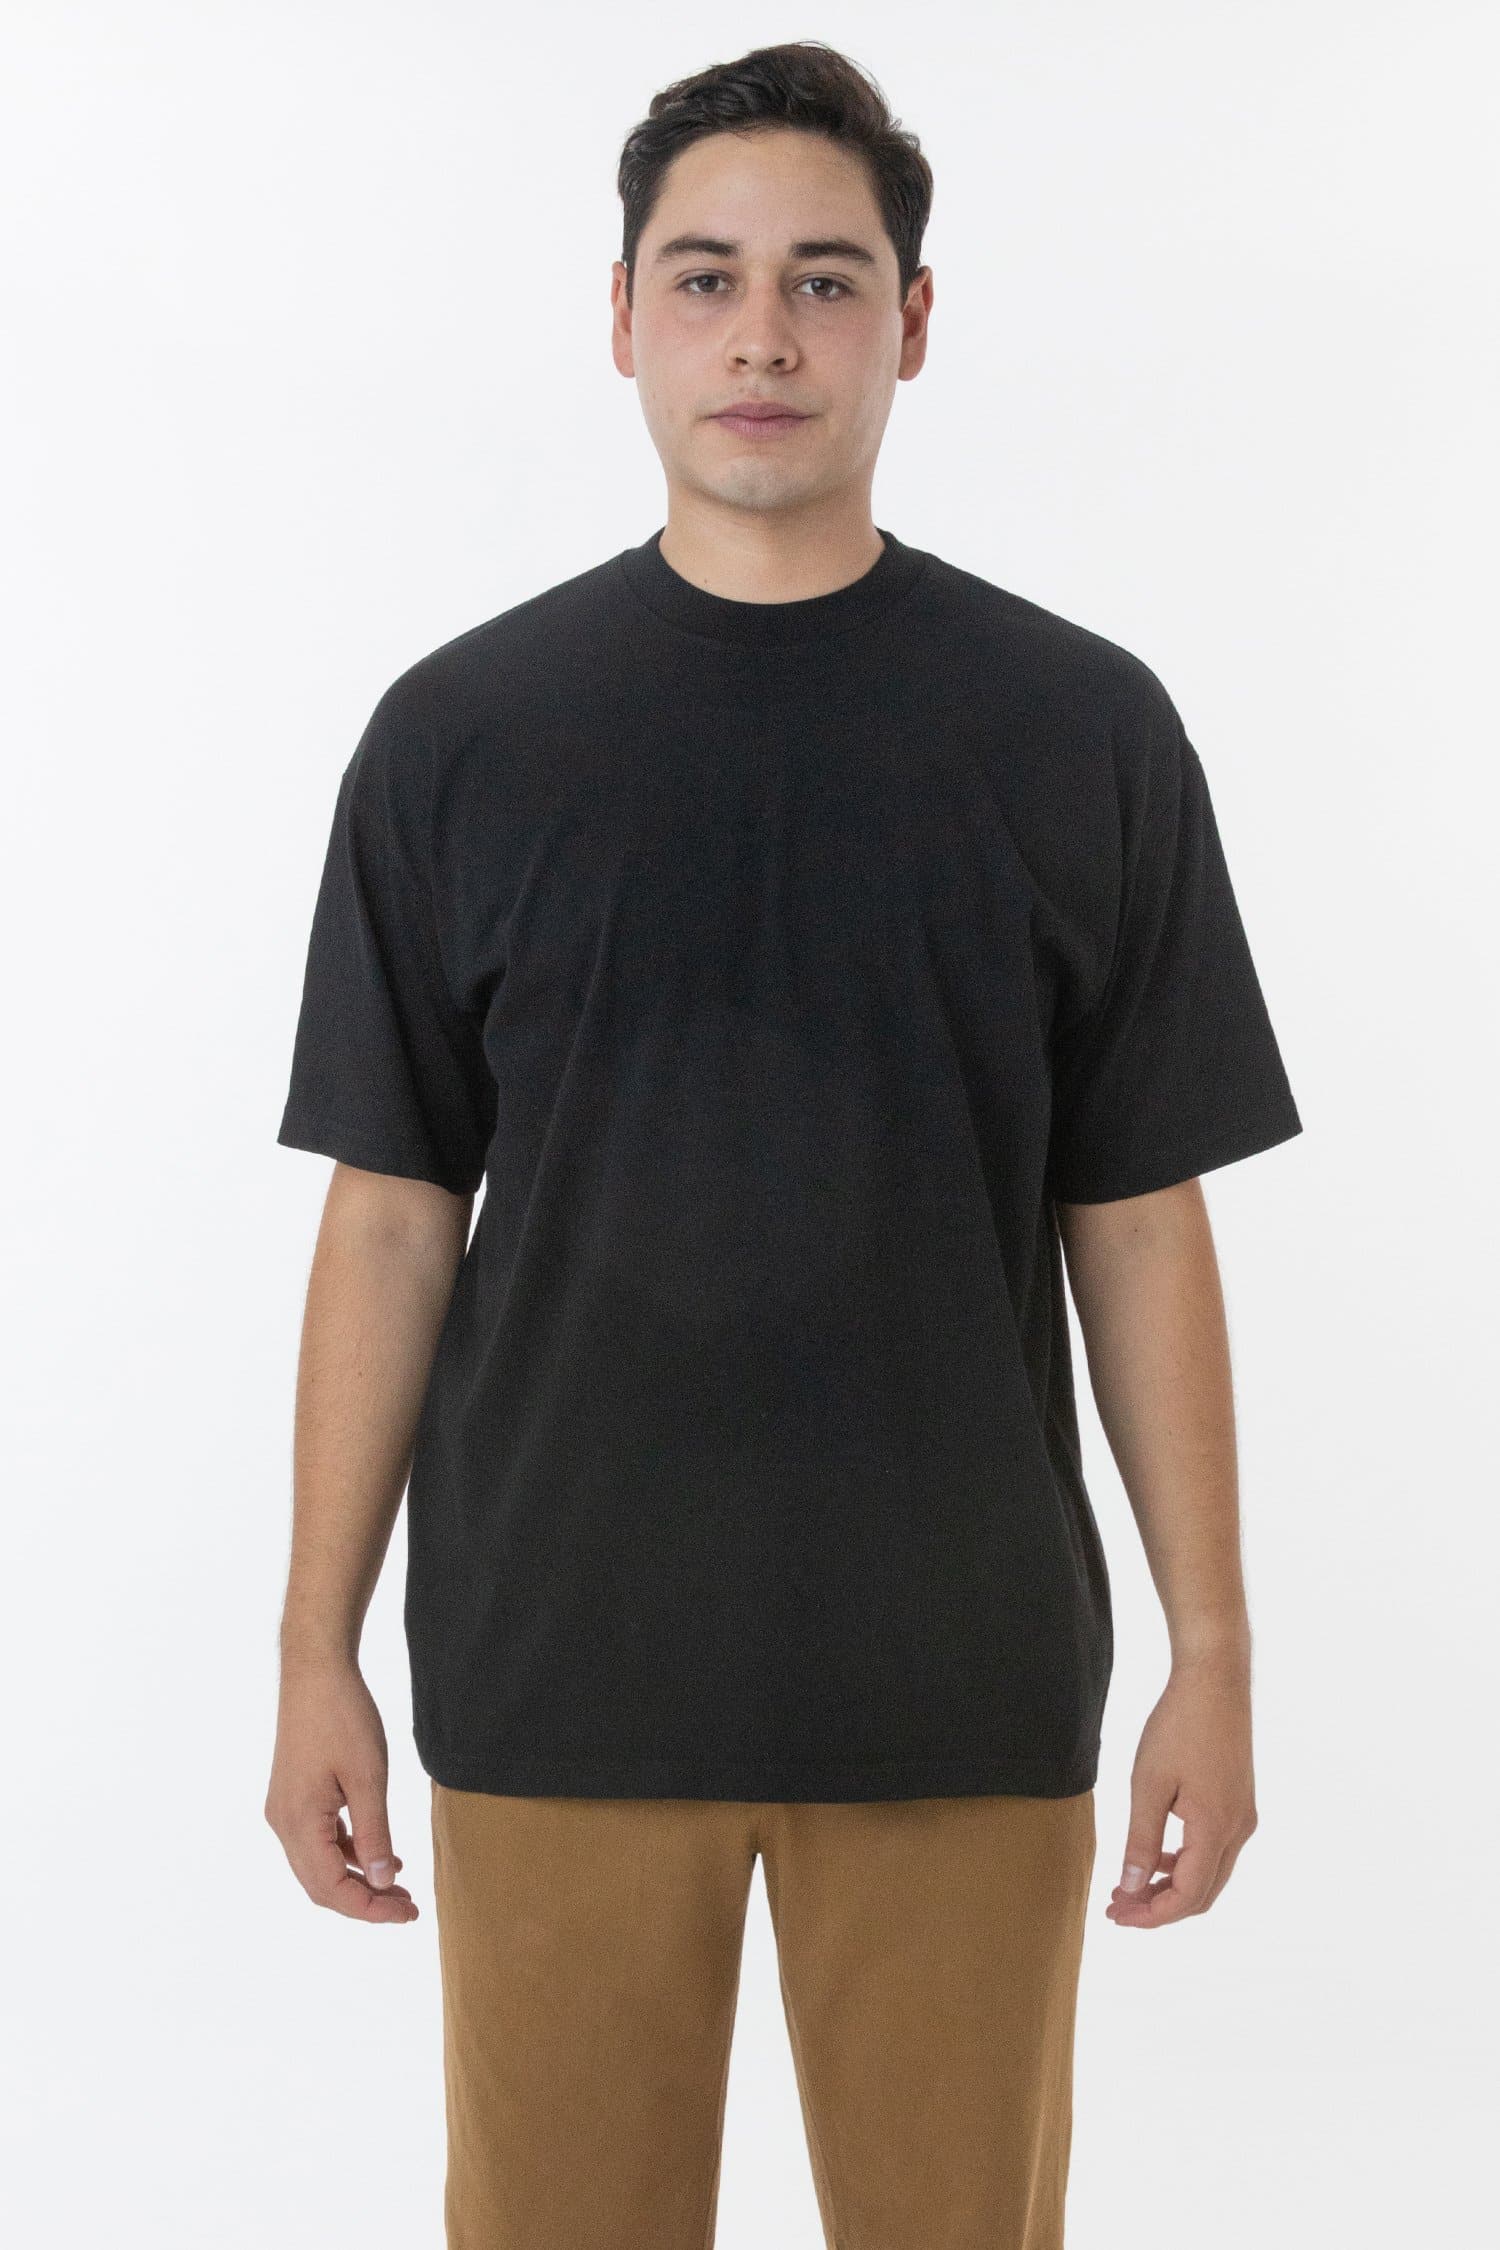 Los Angeles Apparel | Shirt for Men in Chocolate, Size Small